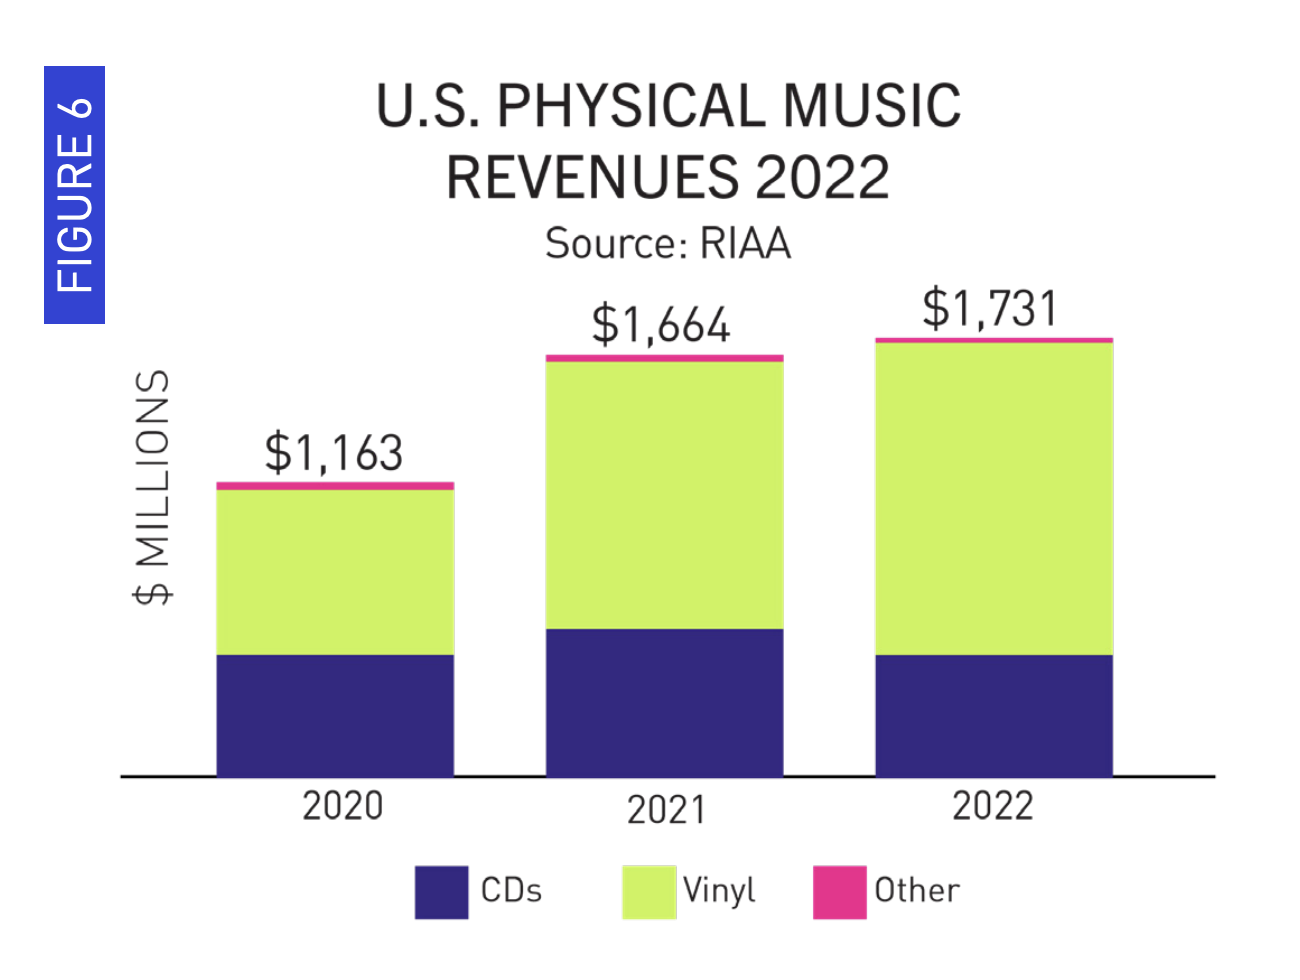 Growth in vinyl revenue was more than enough to offset a drop in revenue from CDs. Vinyl unit sales have surpassed CD unit sales for the first time since 1987.